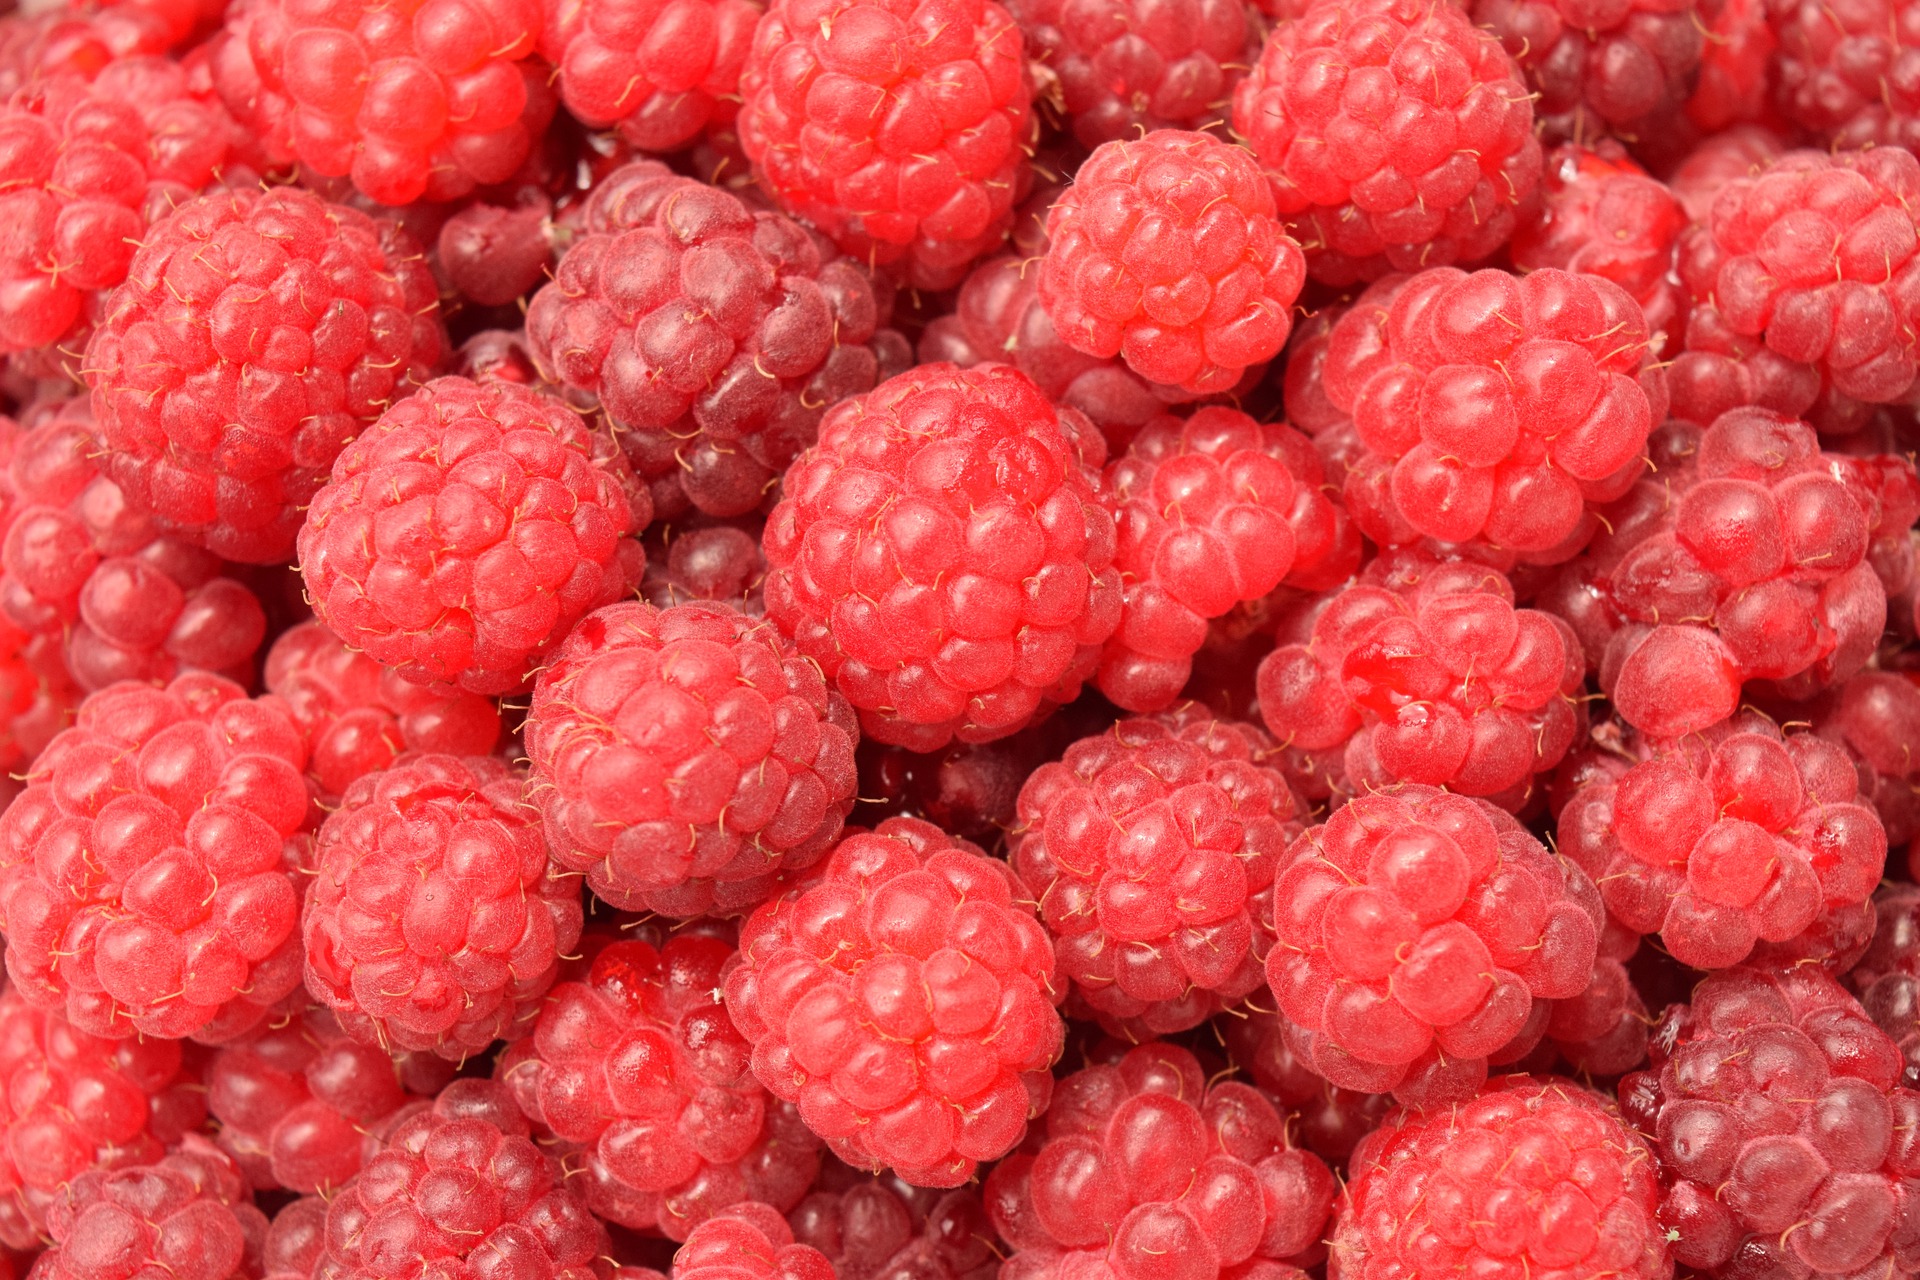 Raspberries: How to Plant, Grow, and Harvest Raspberries | The Old ...